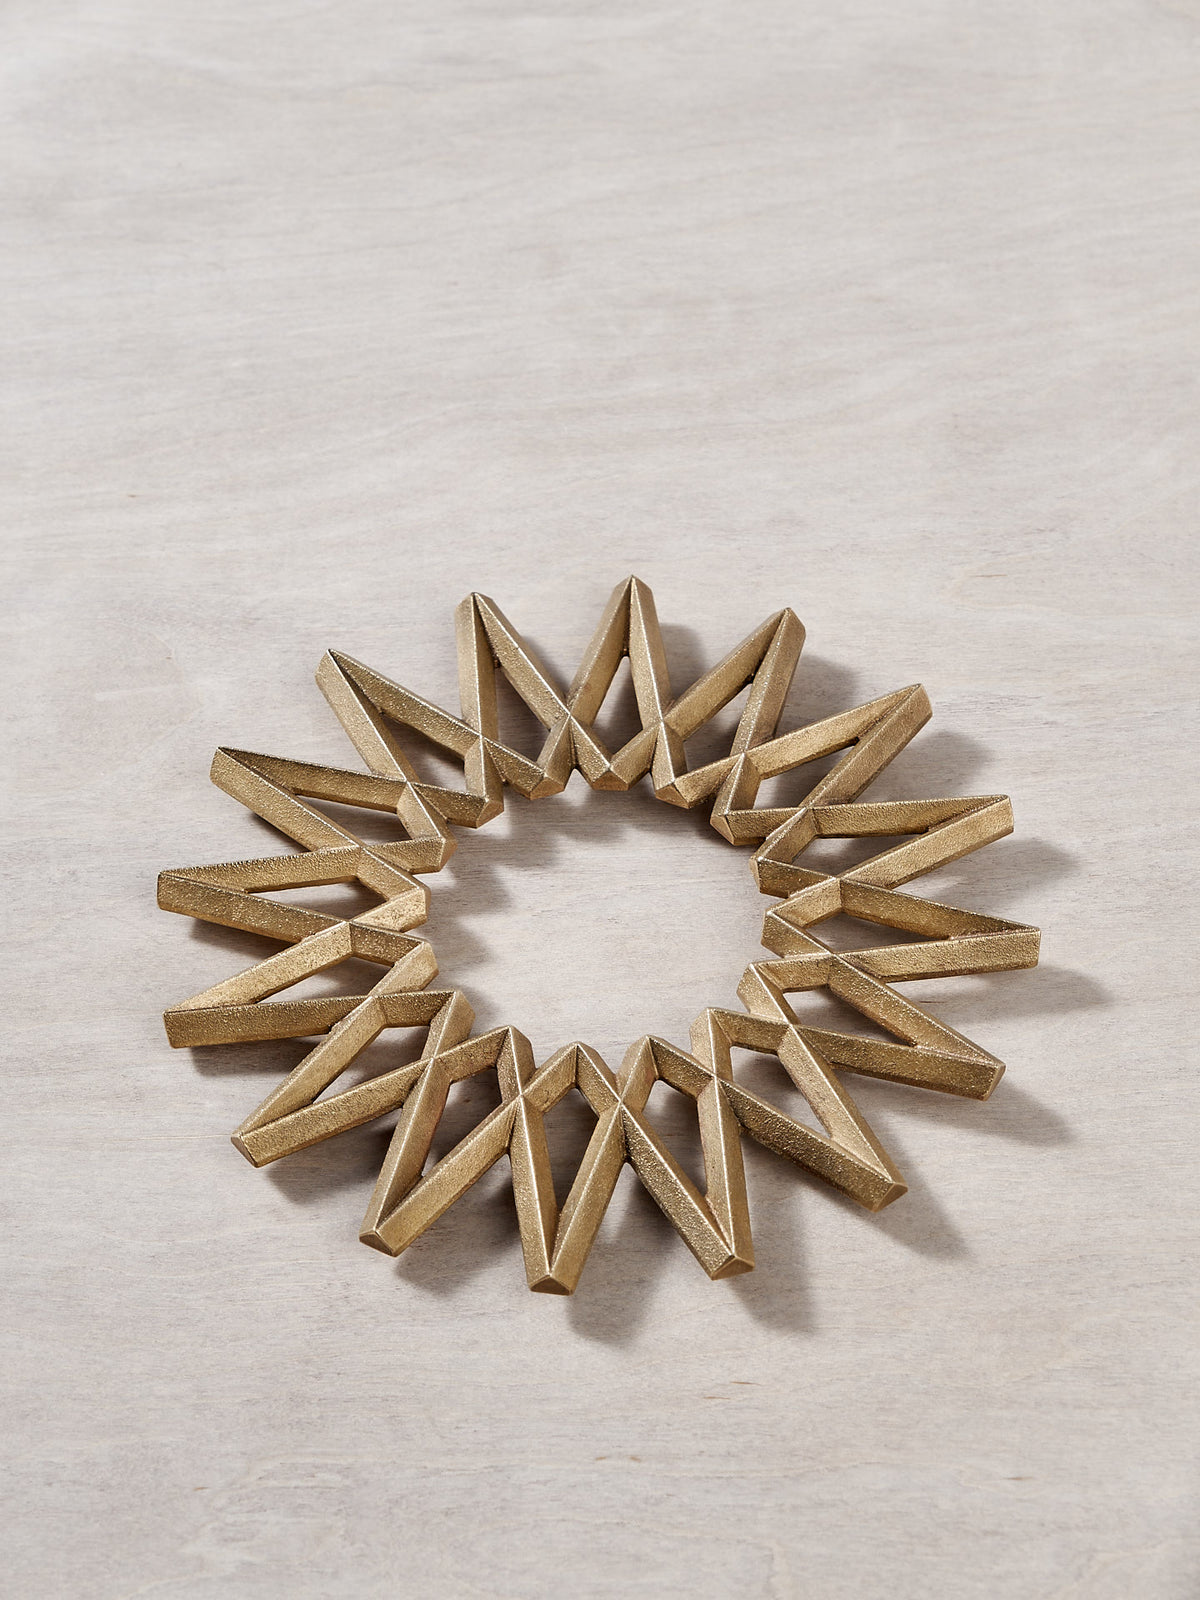 A Galaxy Trivet - Solid Brass bracelet by Futagami on a wooden surface.